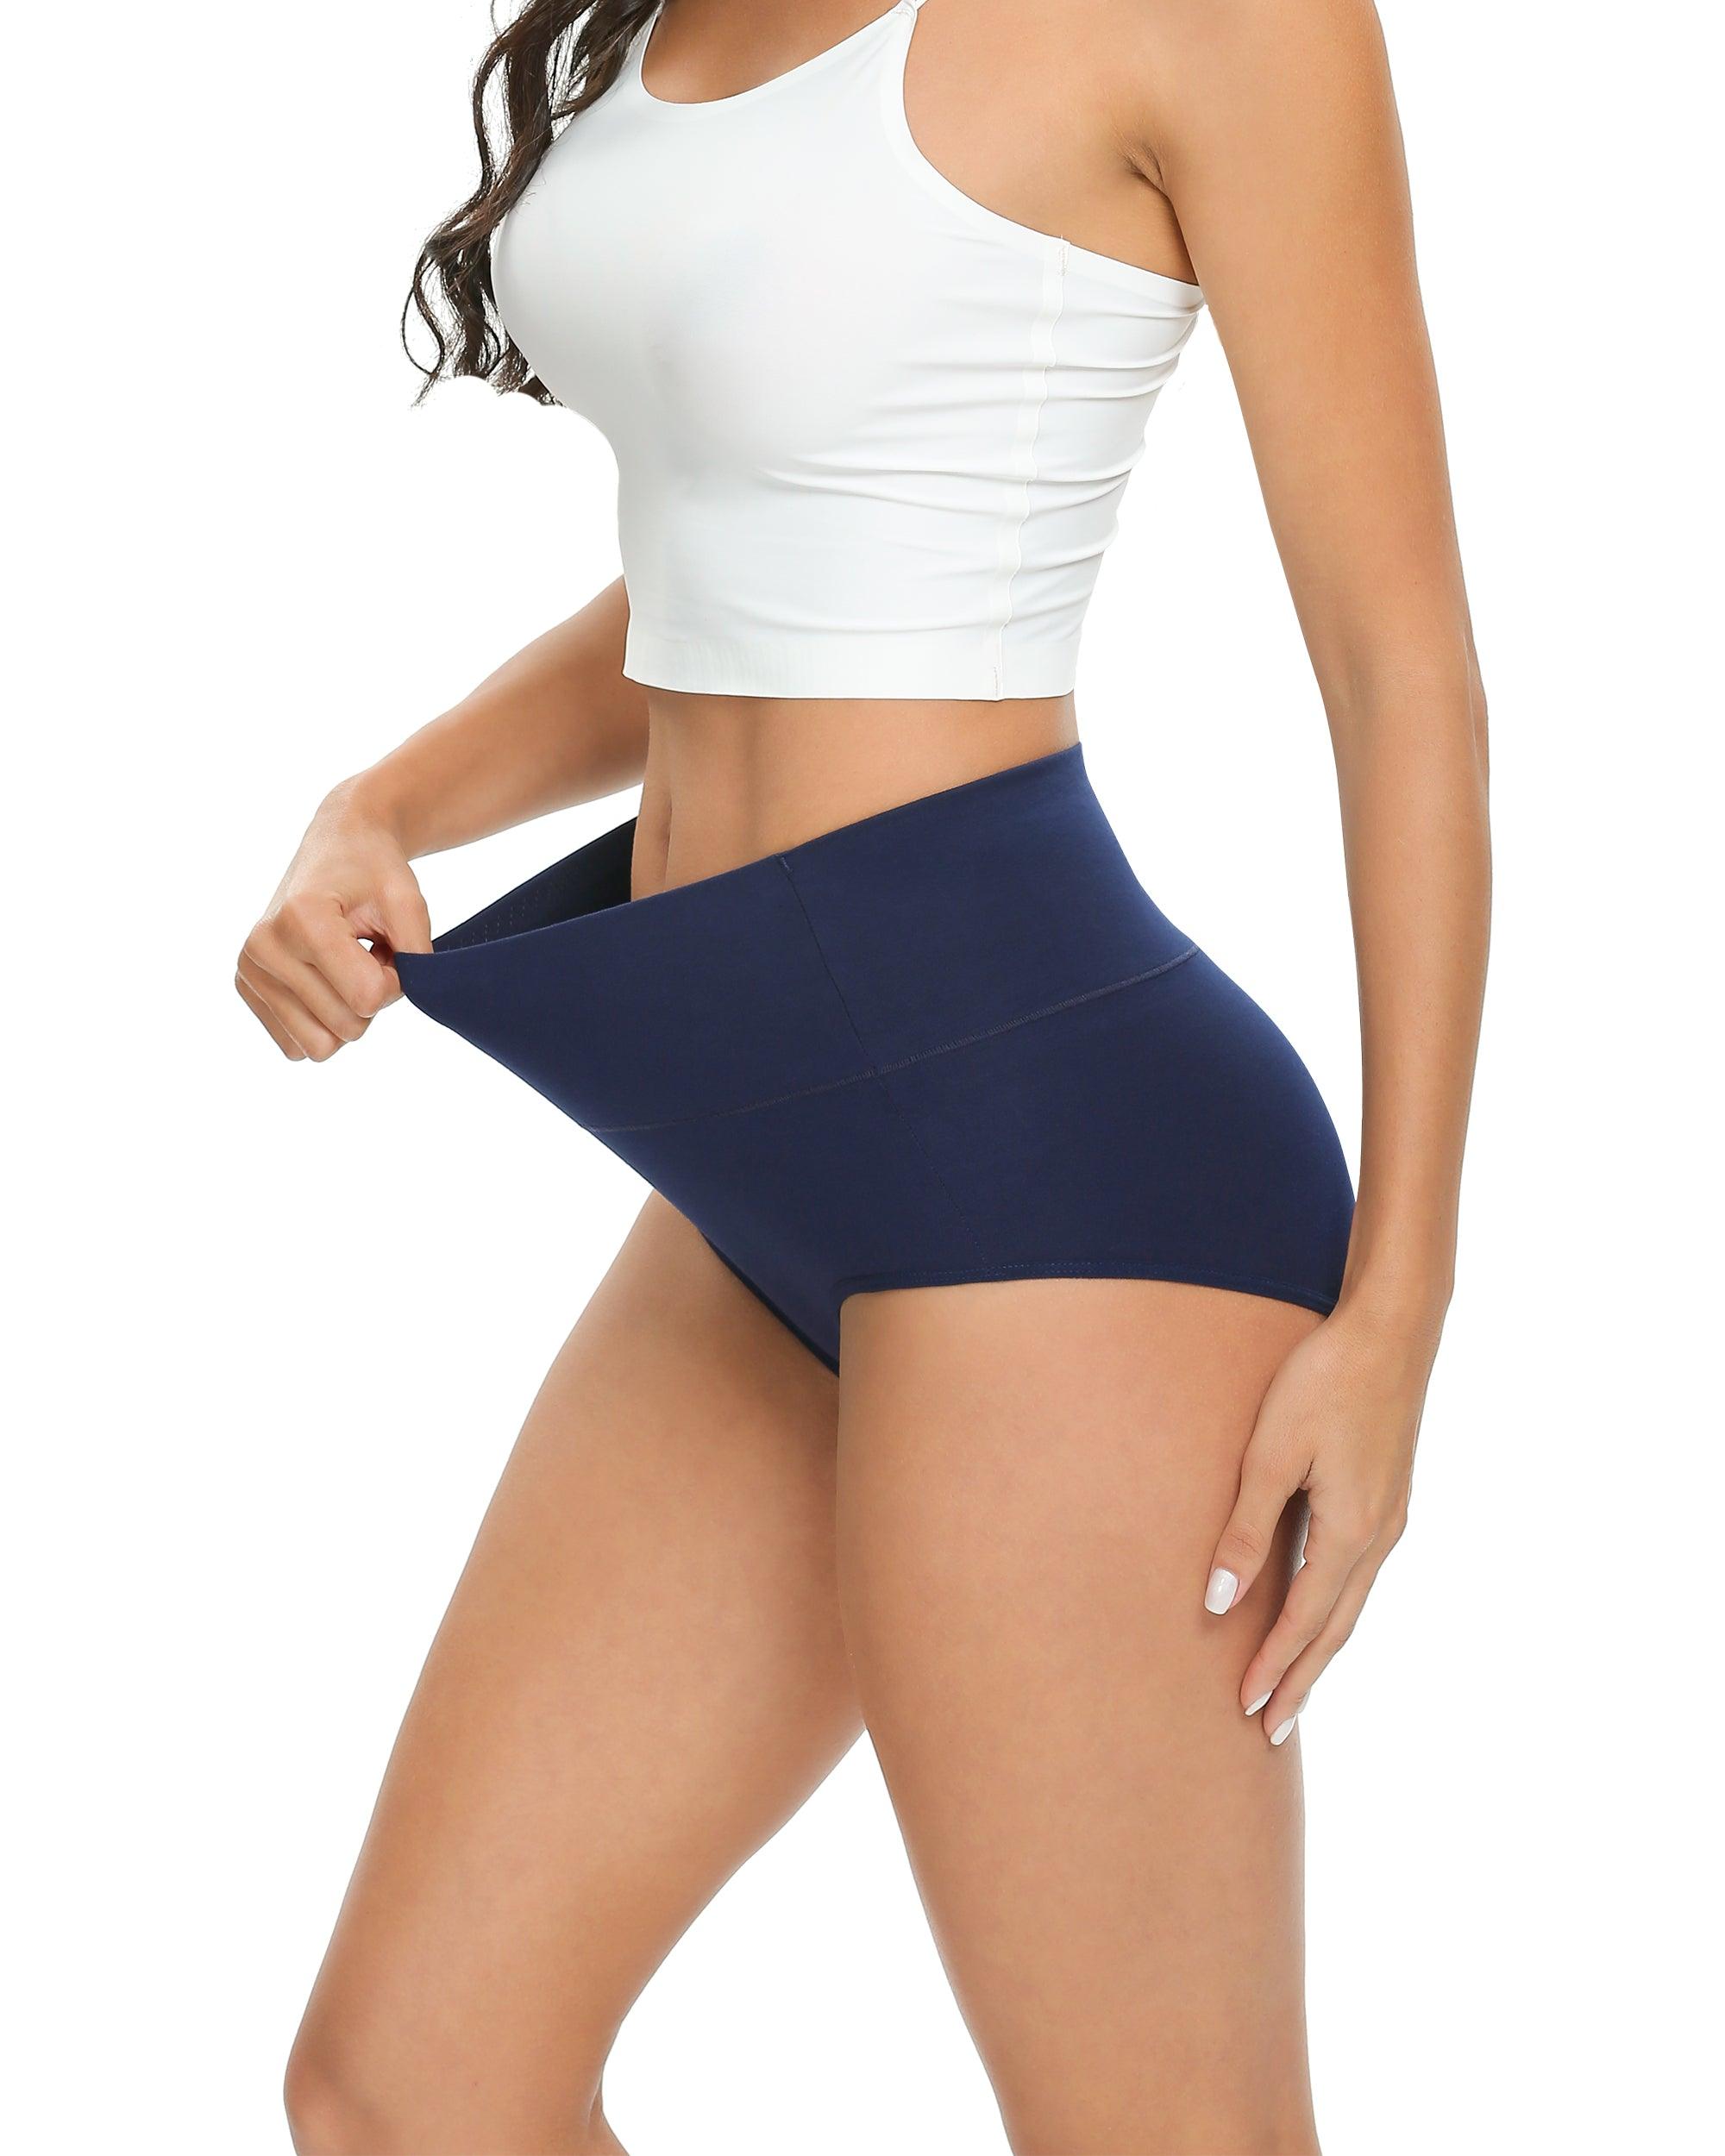 High Waist Control Tummy Control Panties Set For Women, Abdomen High  Waisted Slimming Underwear For Postpartum Recovery 4XL From Mang07, $12.07